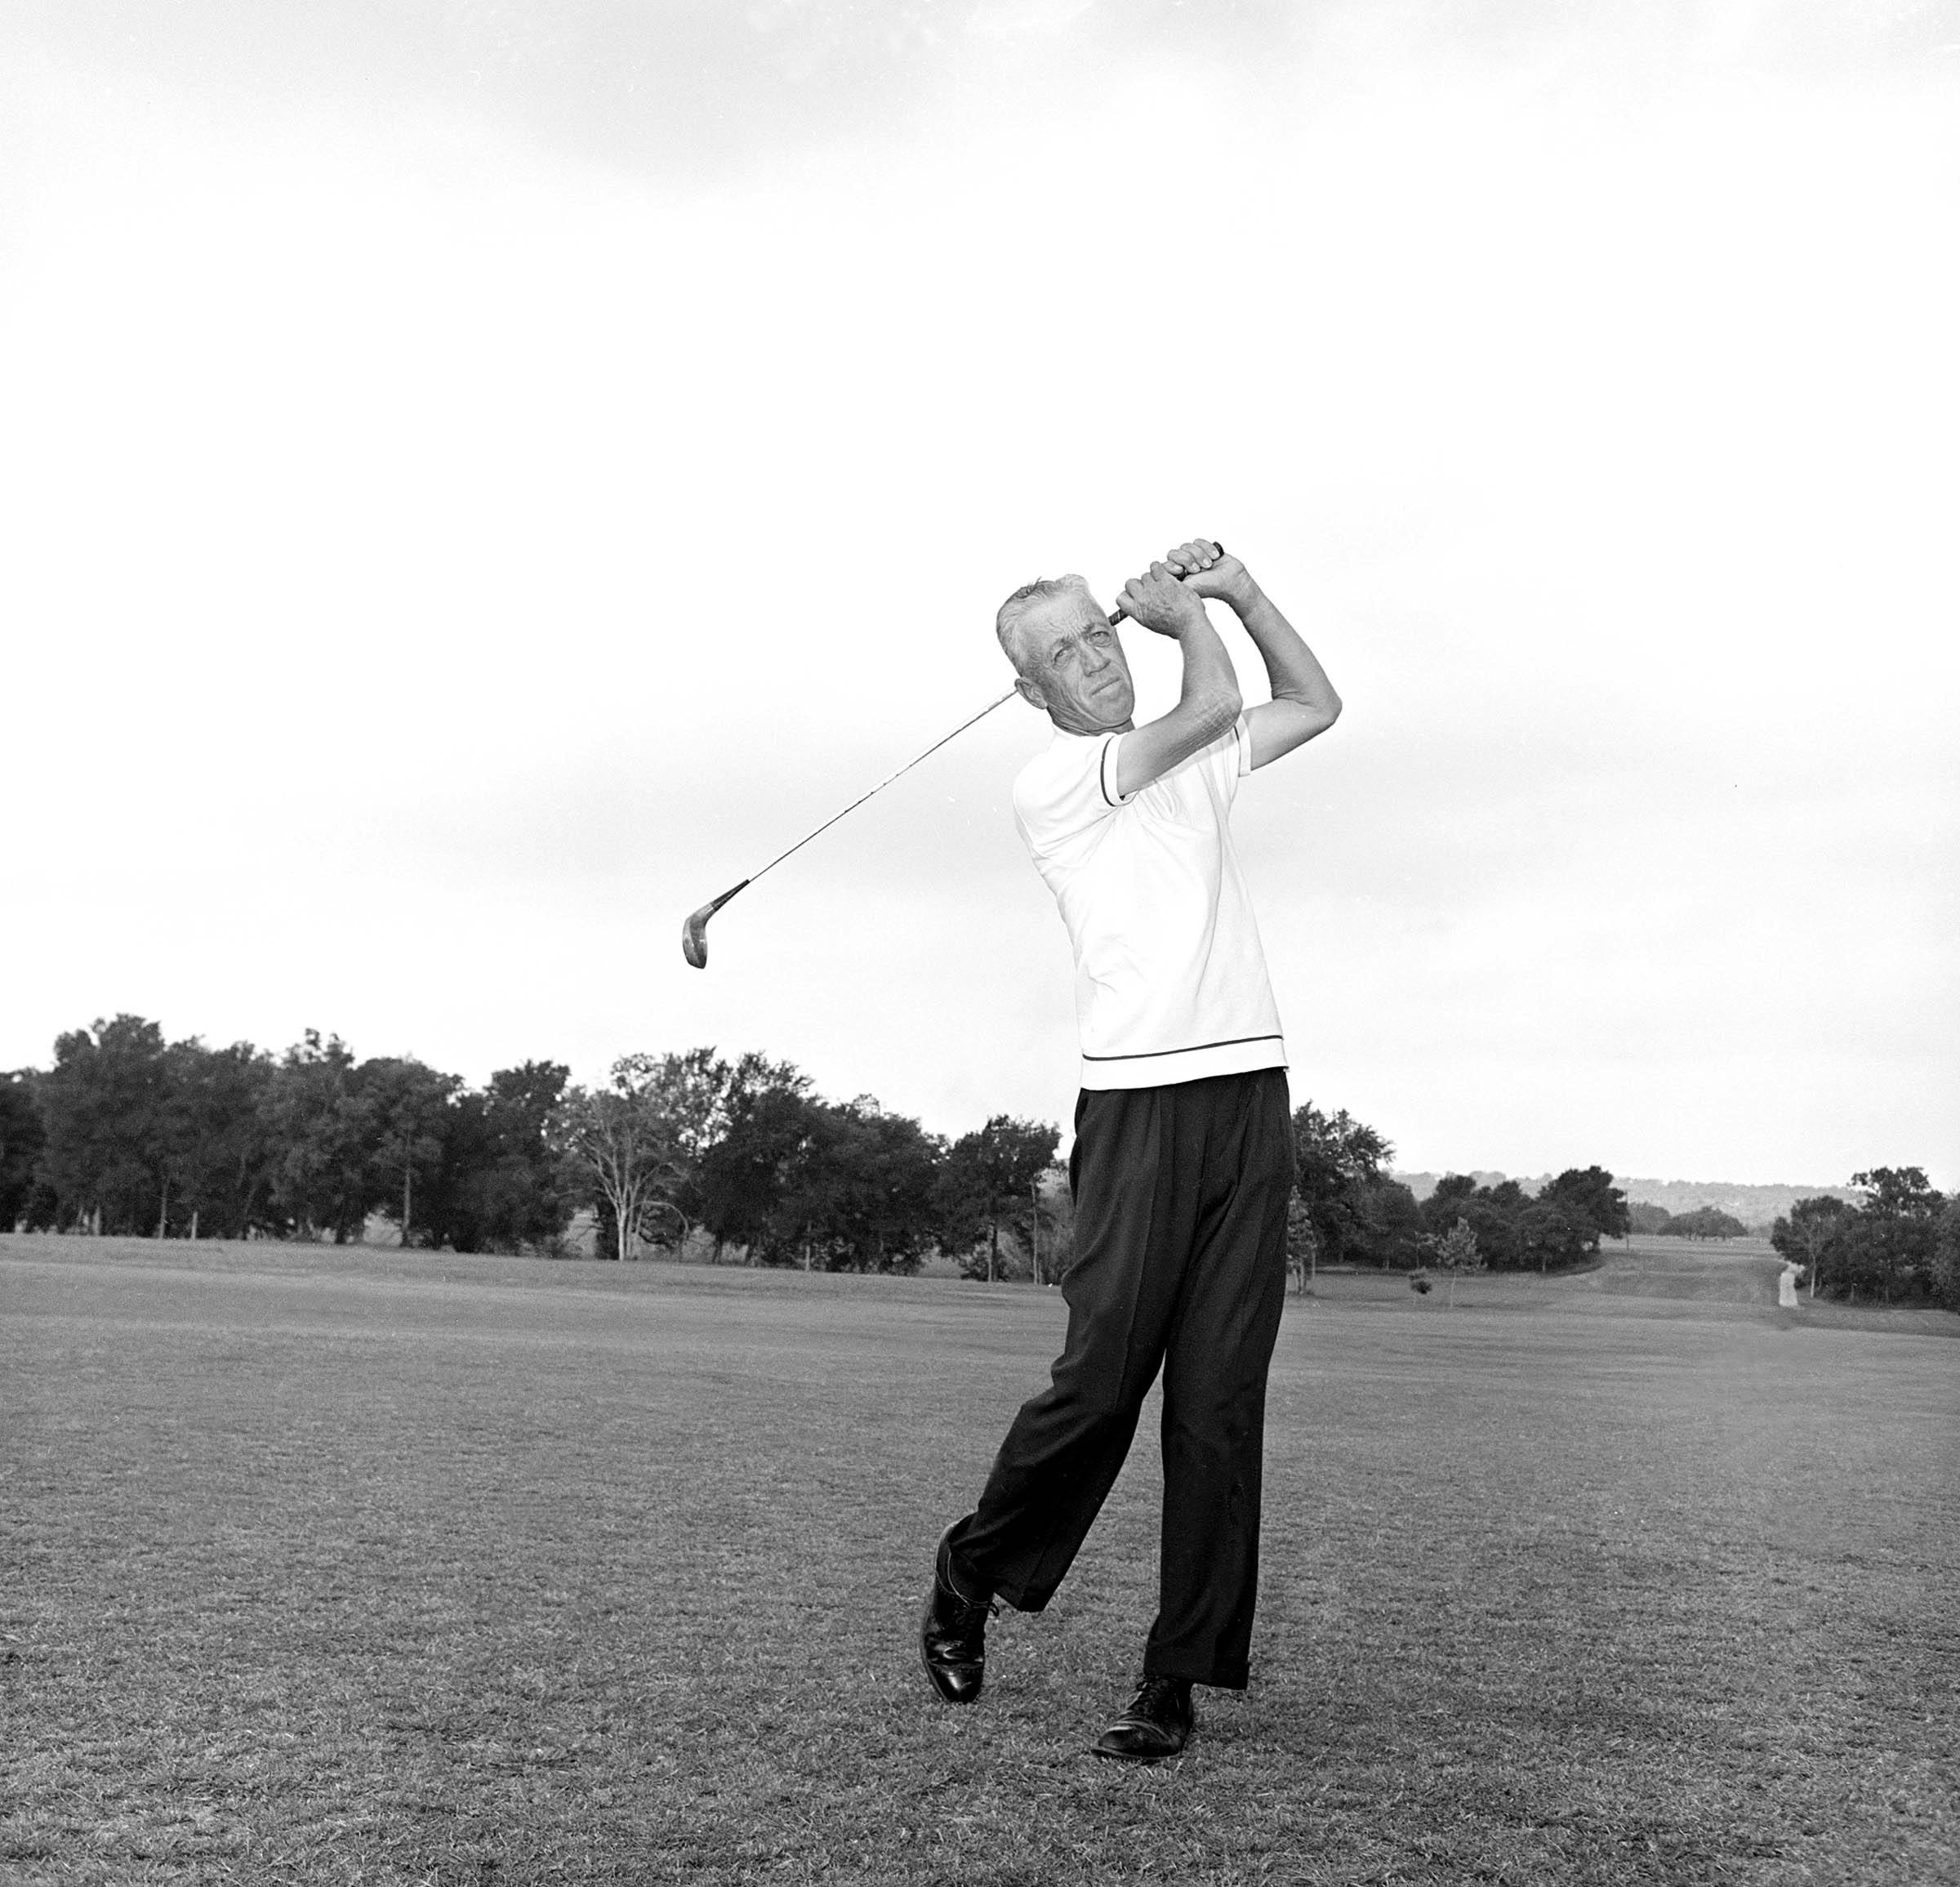 Pro golfer Harvey Penick shown during a posed swing at the Austin, Texas Country Club, May 2, 1964.